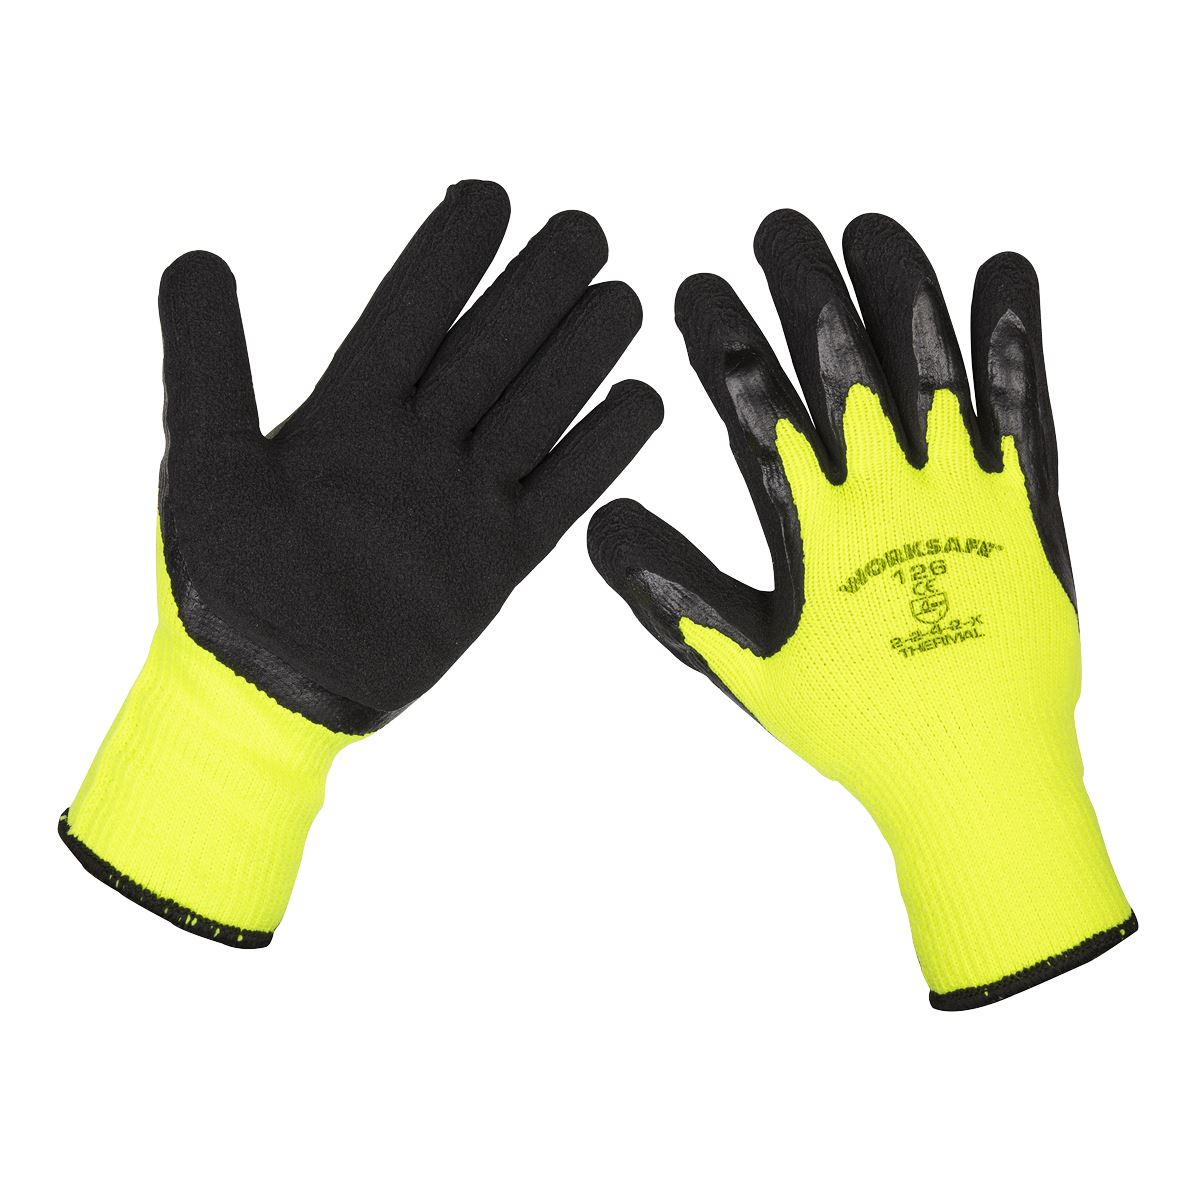 Worksafe by Sealey Thermal Super Grip Gloves (Large) - Pack of 120 Pairs